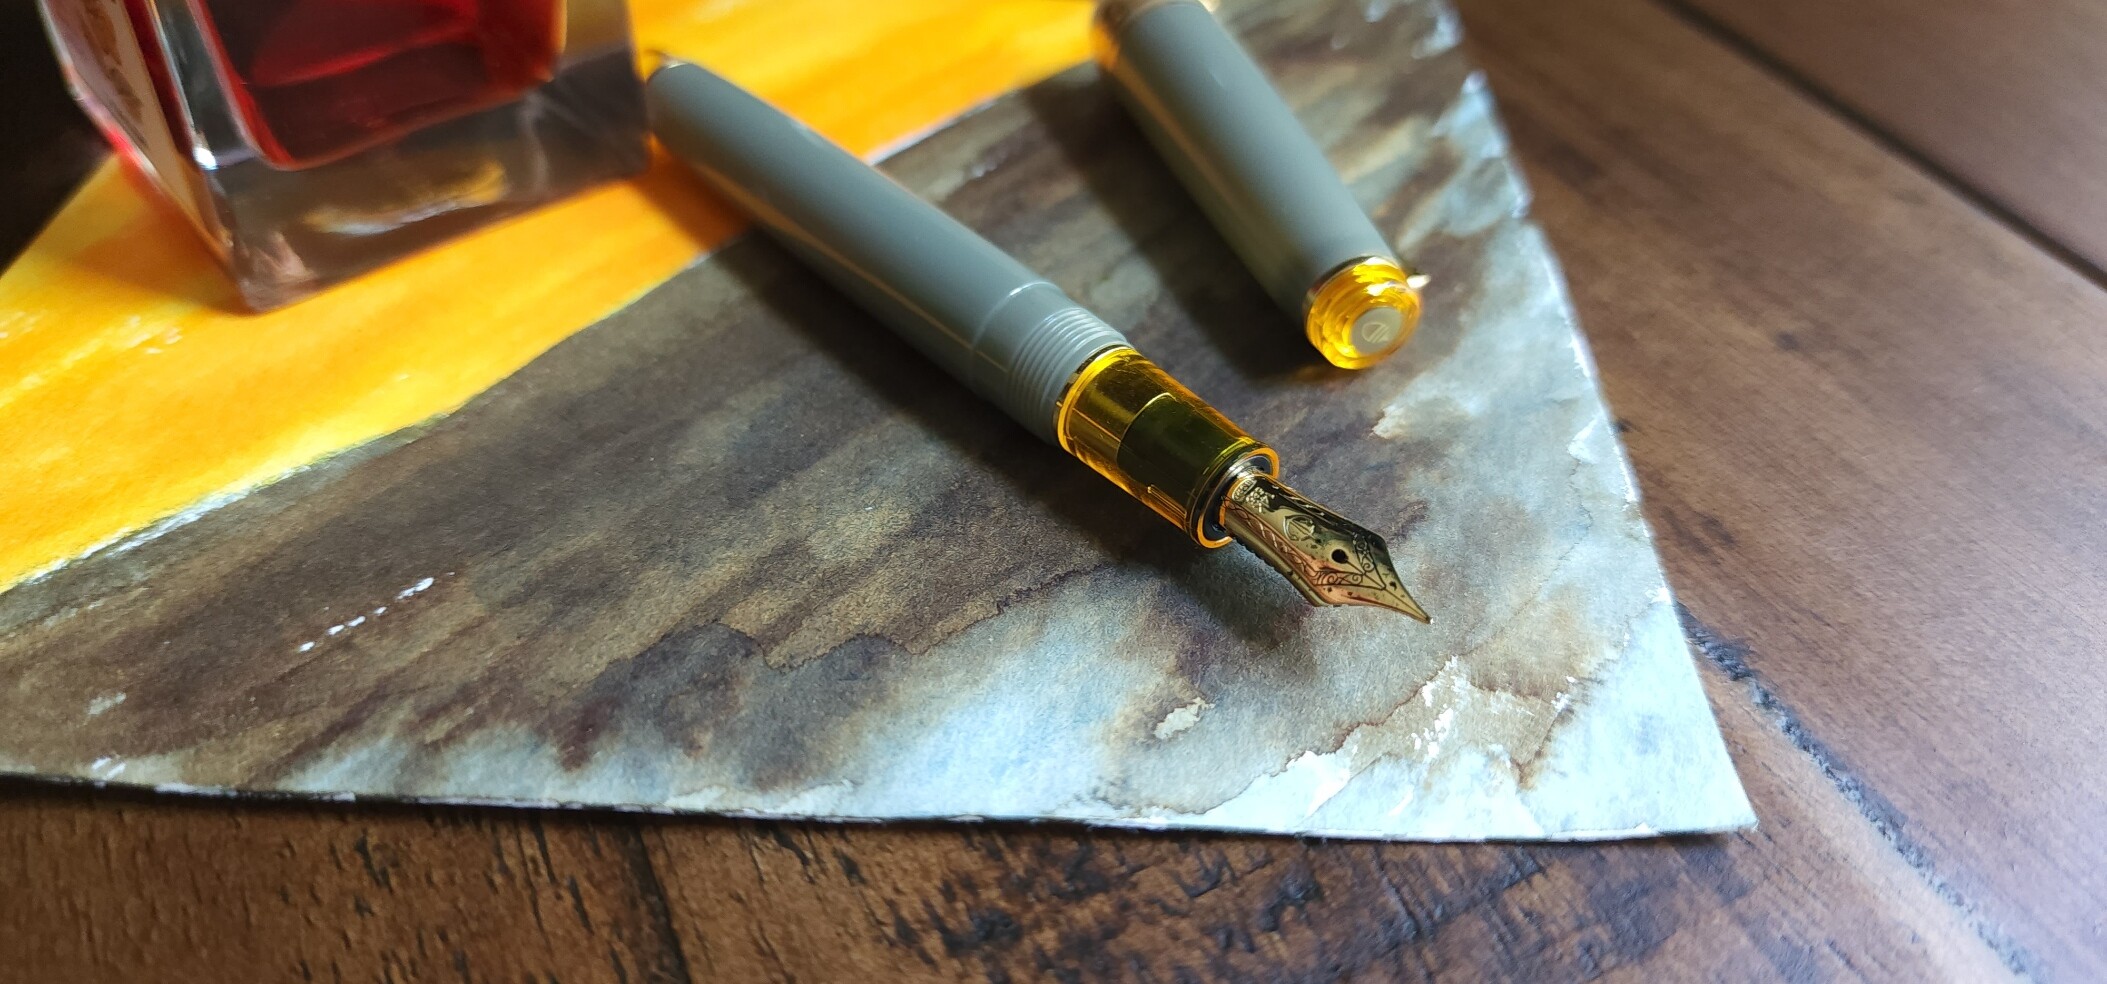 Sailor Pro Gear Slim 'Nuts' pen with a medium gold nib and light gray green translucent body with transparent yellow accents with swatches of the green/brown/blue Sailor Manyo Shirakashi and bright yellow Sailor Manyo Yamabuki inks.